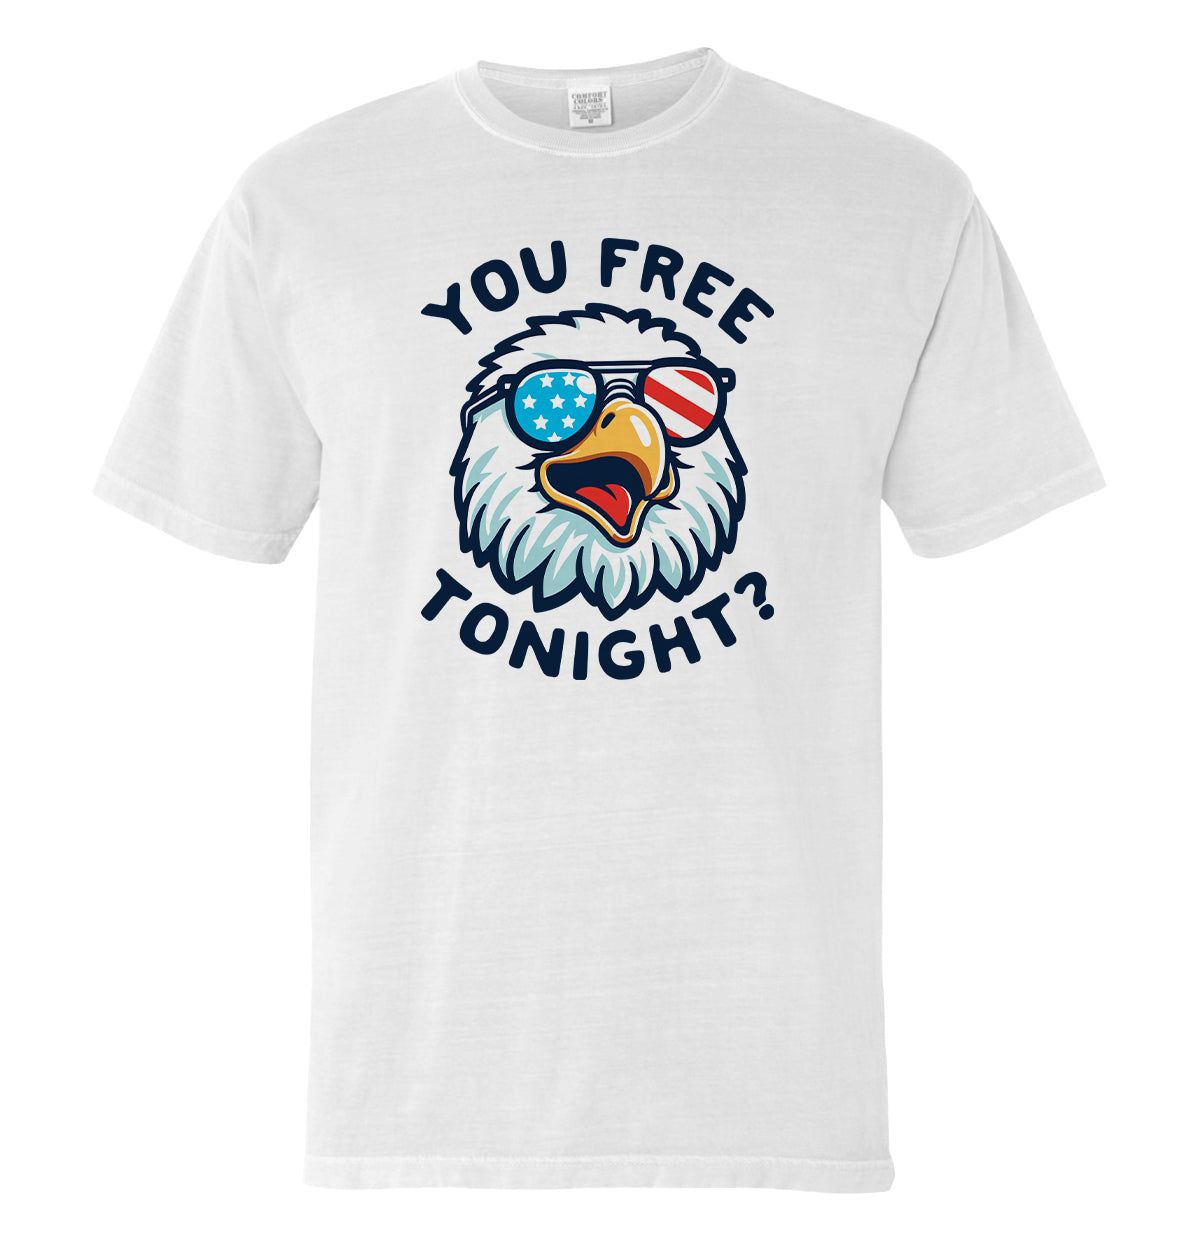 You Free Tonight (Front)